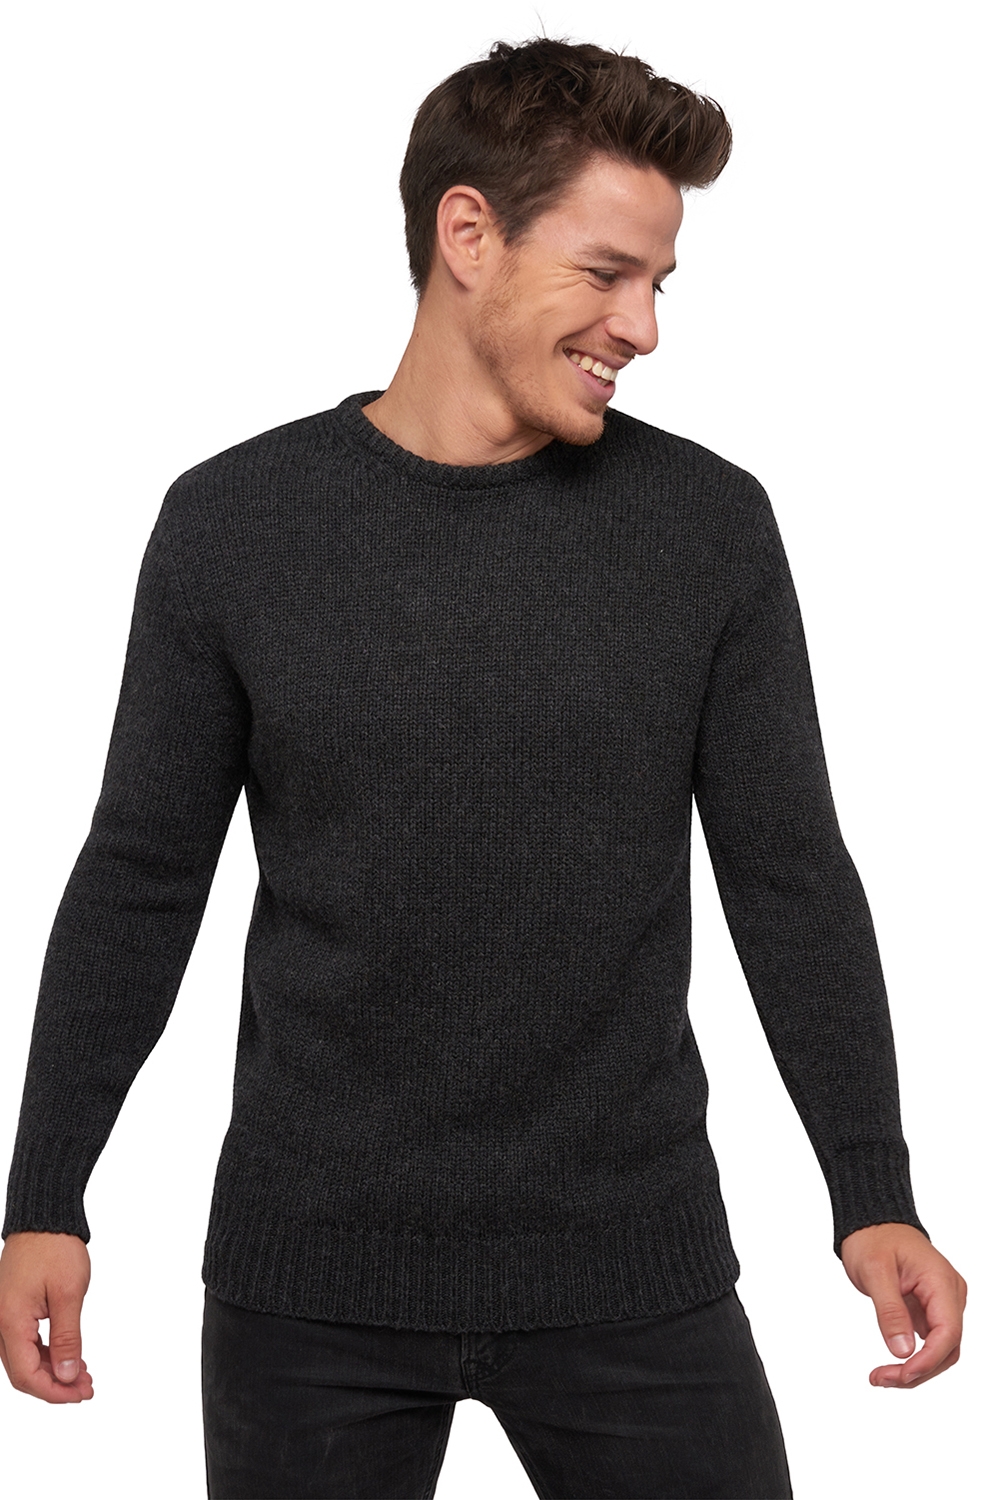 Chameau pull homme col rond cole anthracite 2xl